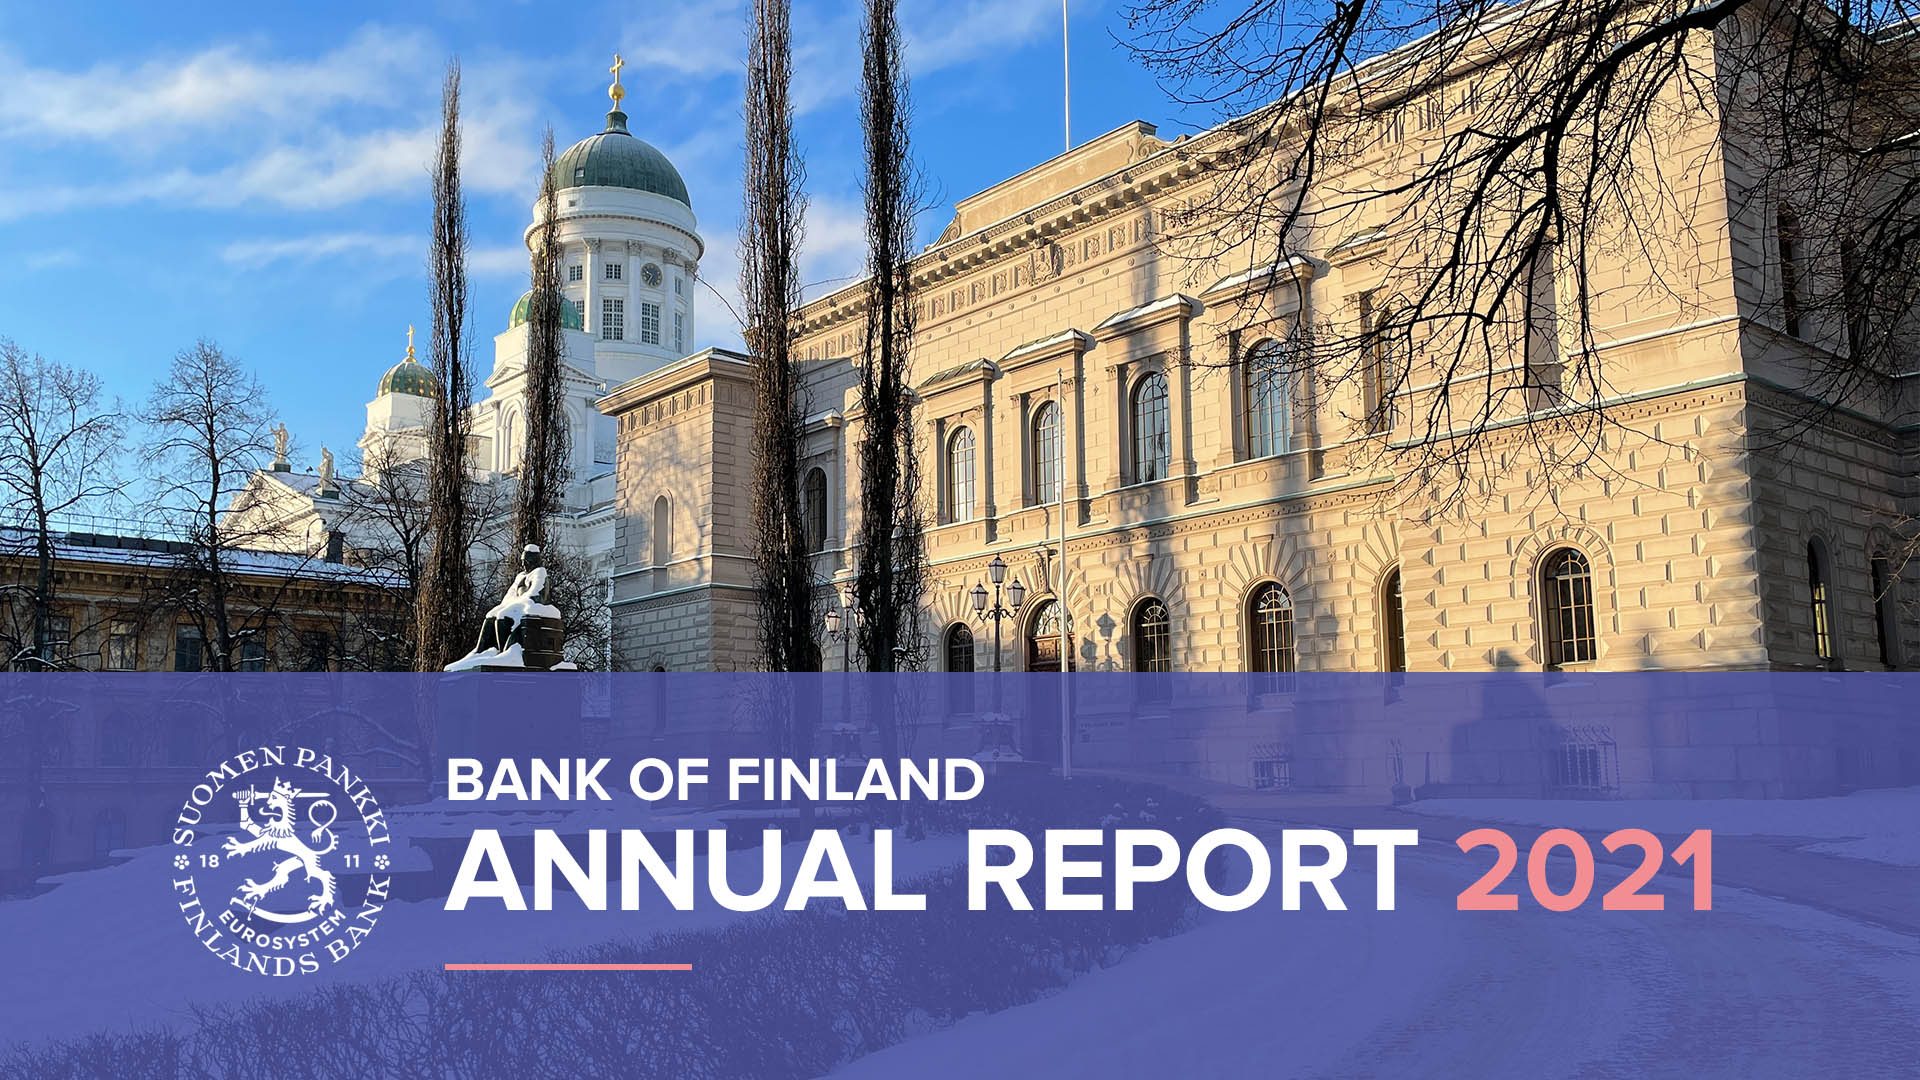 Bank of Finland Annual Report 2020